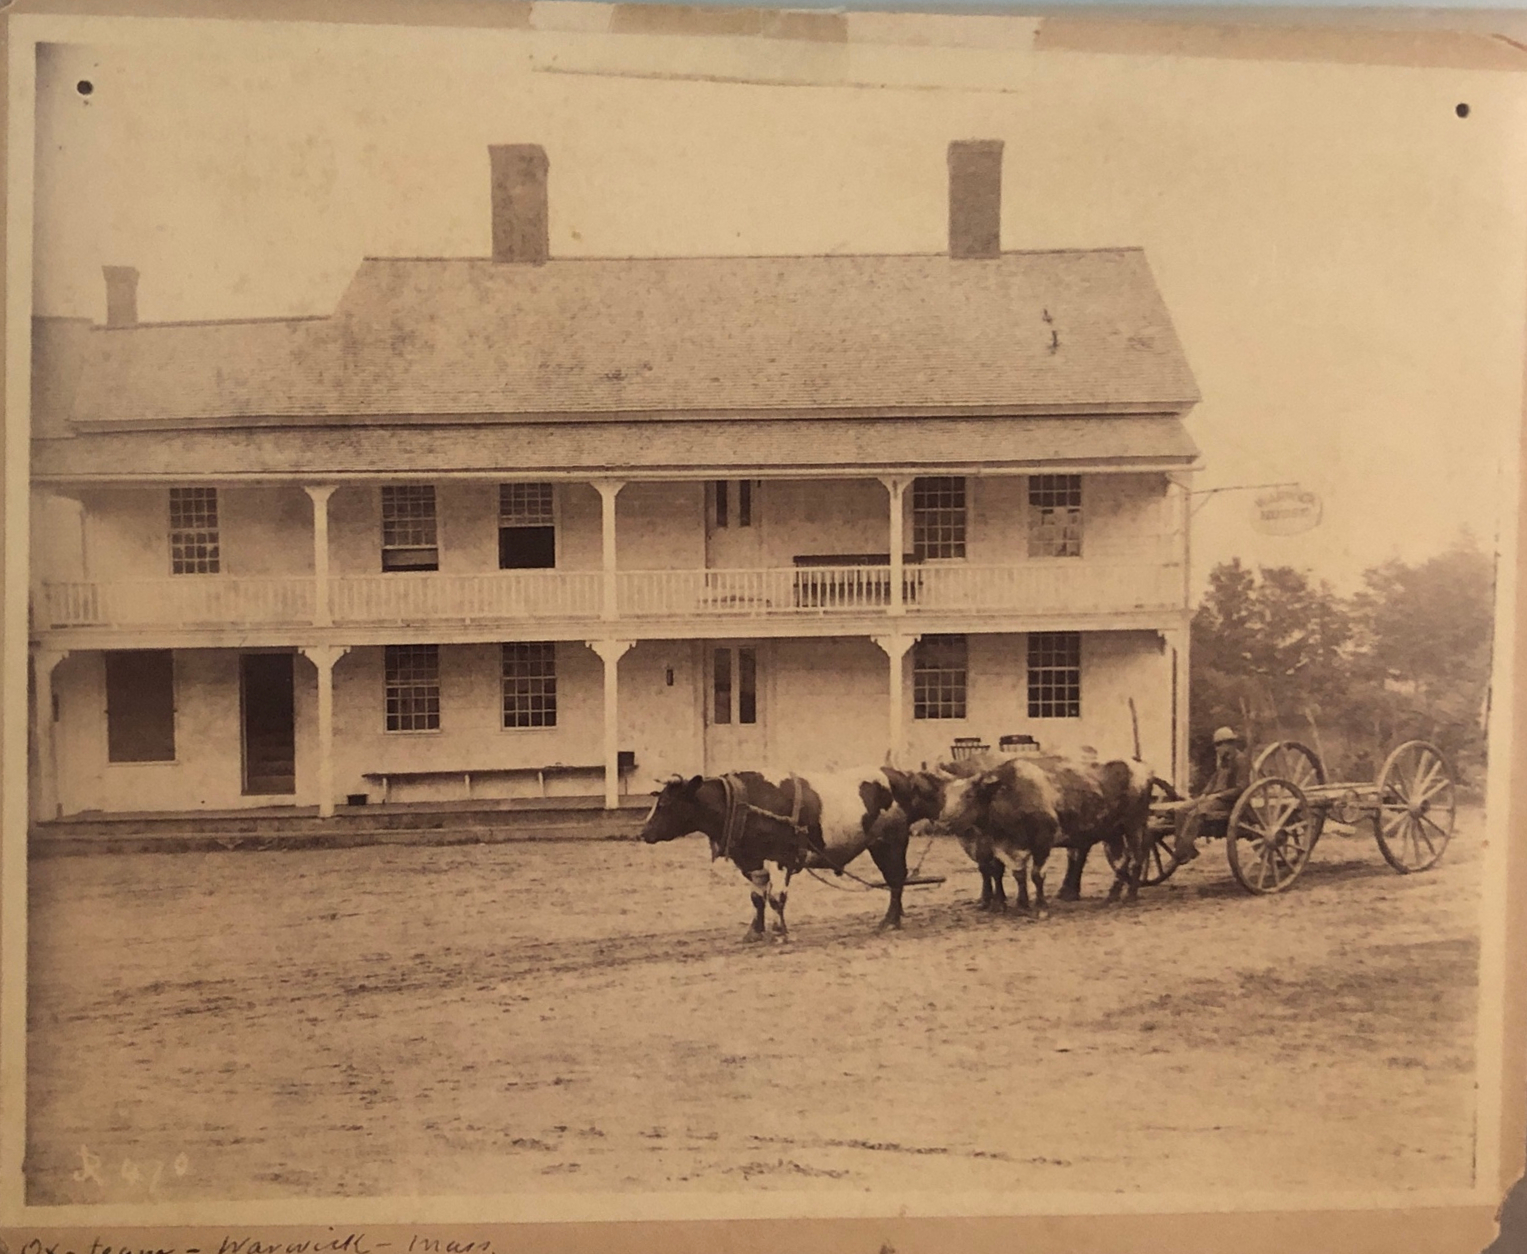 Image of a wagon pulled by oxen in front of Warwick Inn, undated